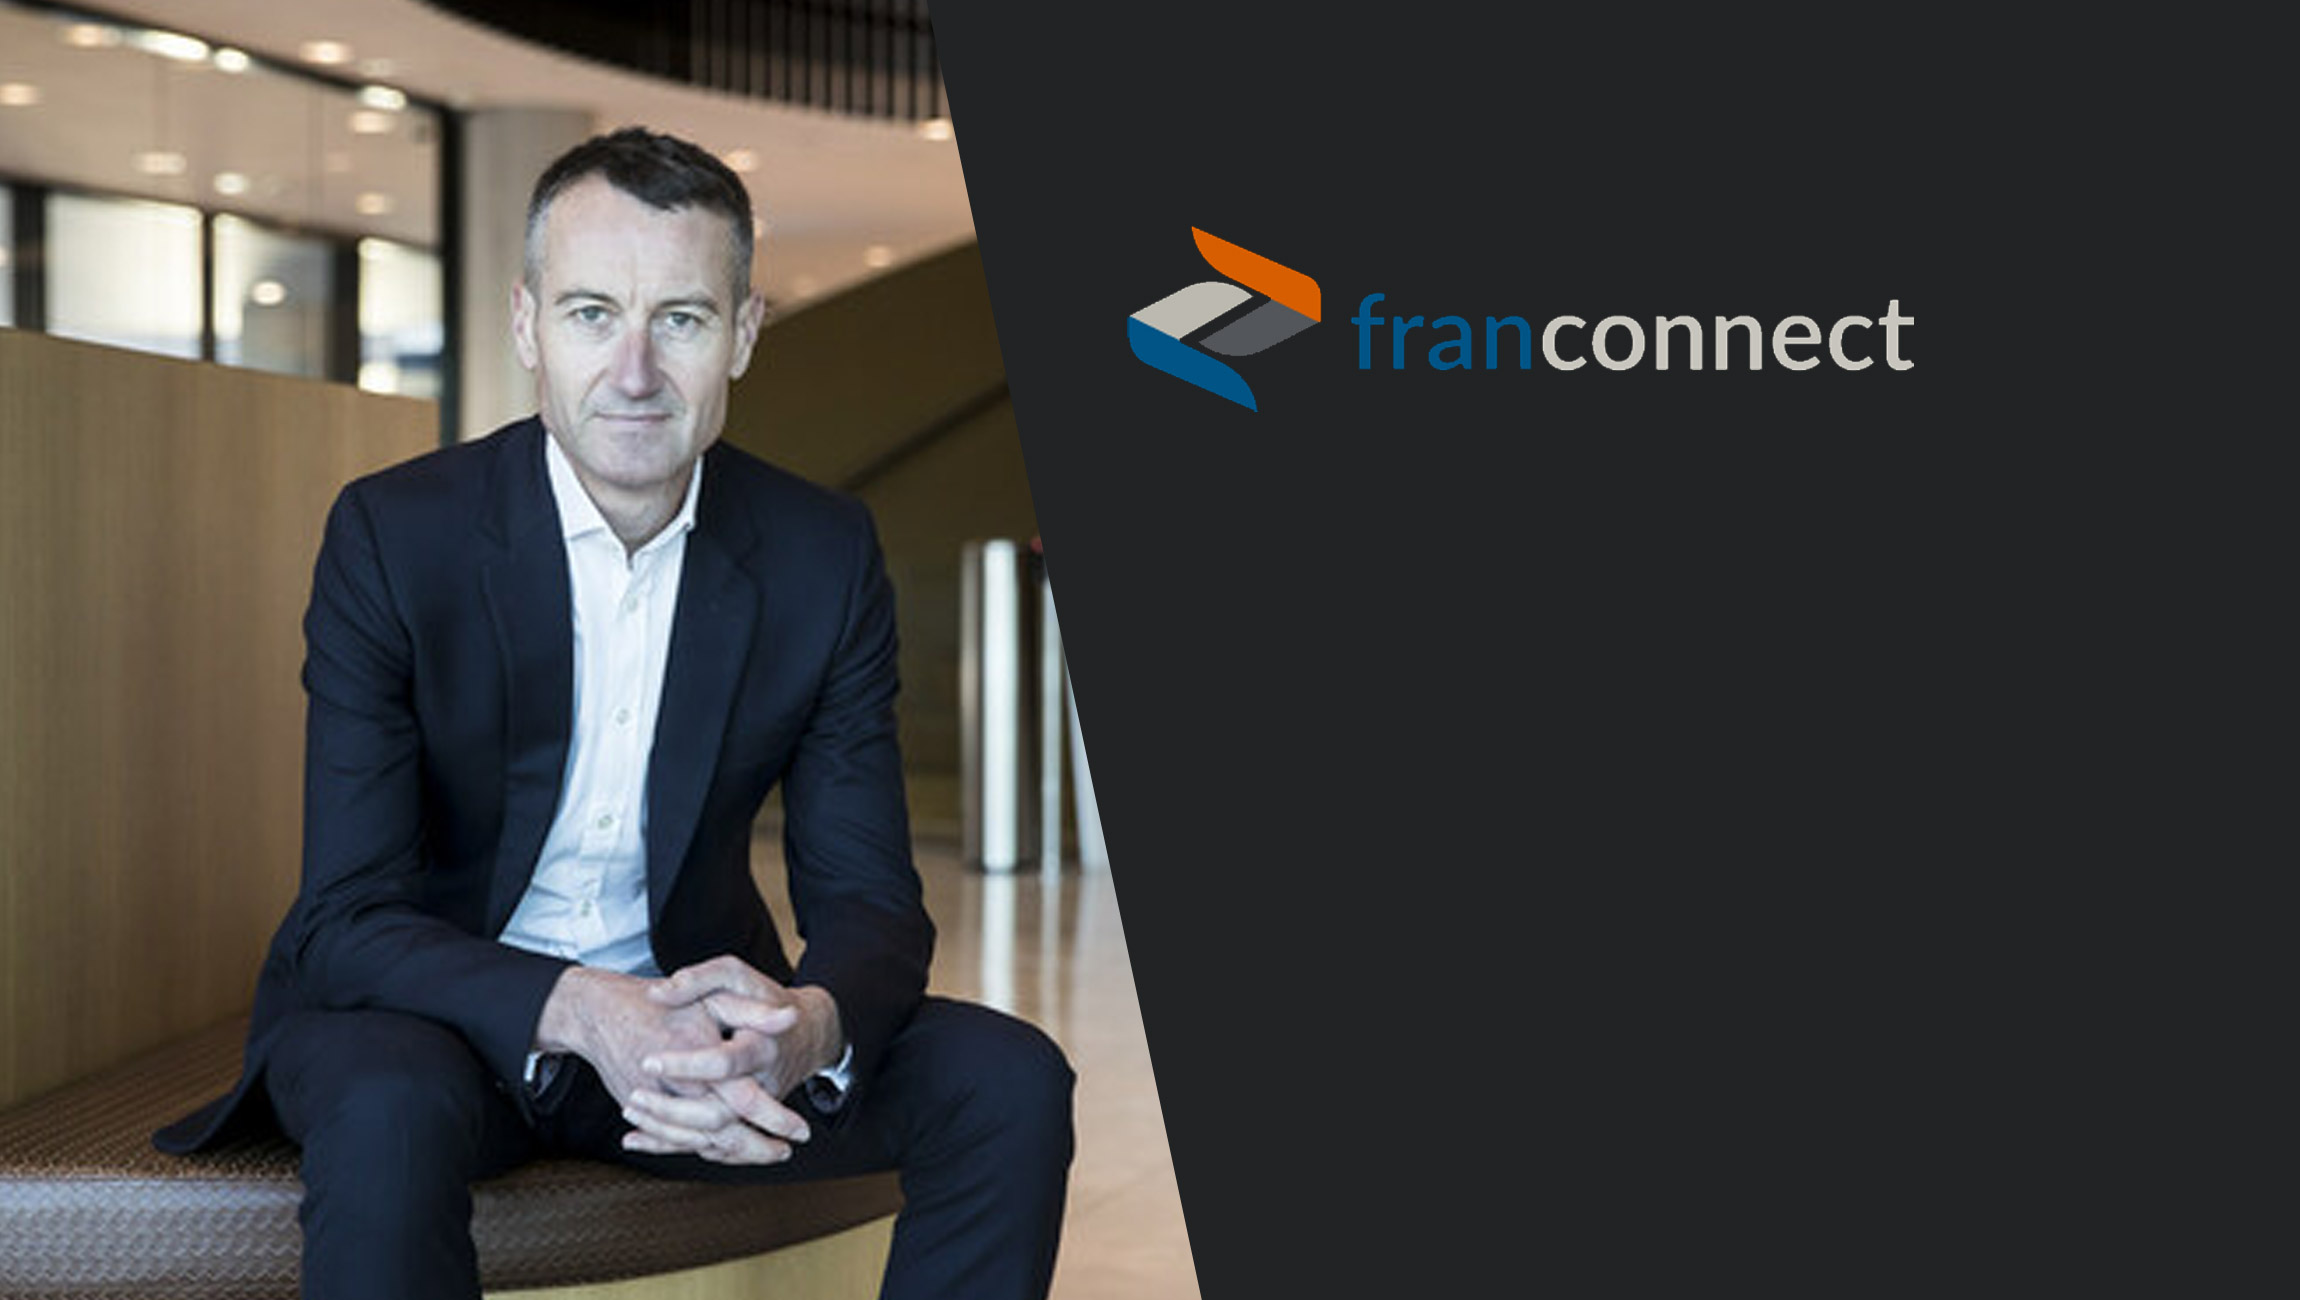 FranConnect Expands Global Presence, Launching in Australia & APAC and Appointment of General Manager, A/NZ